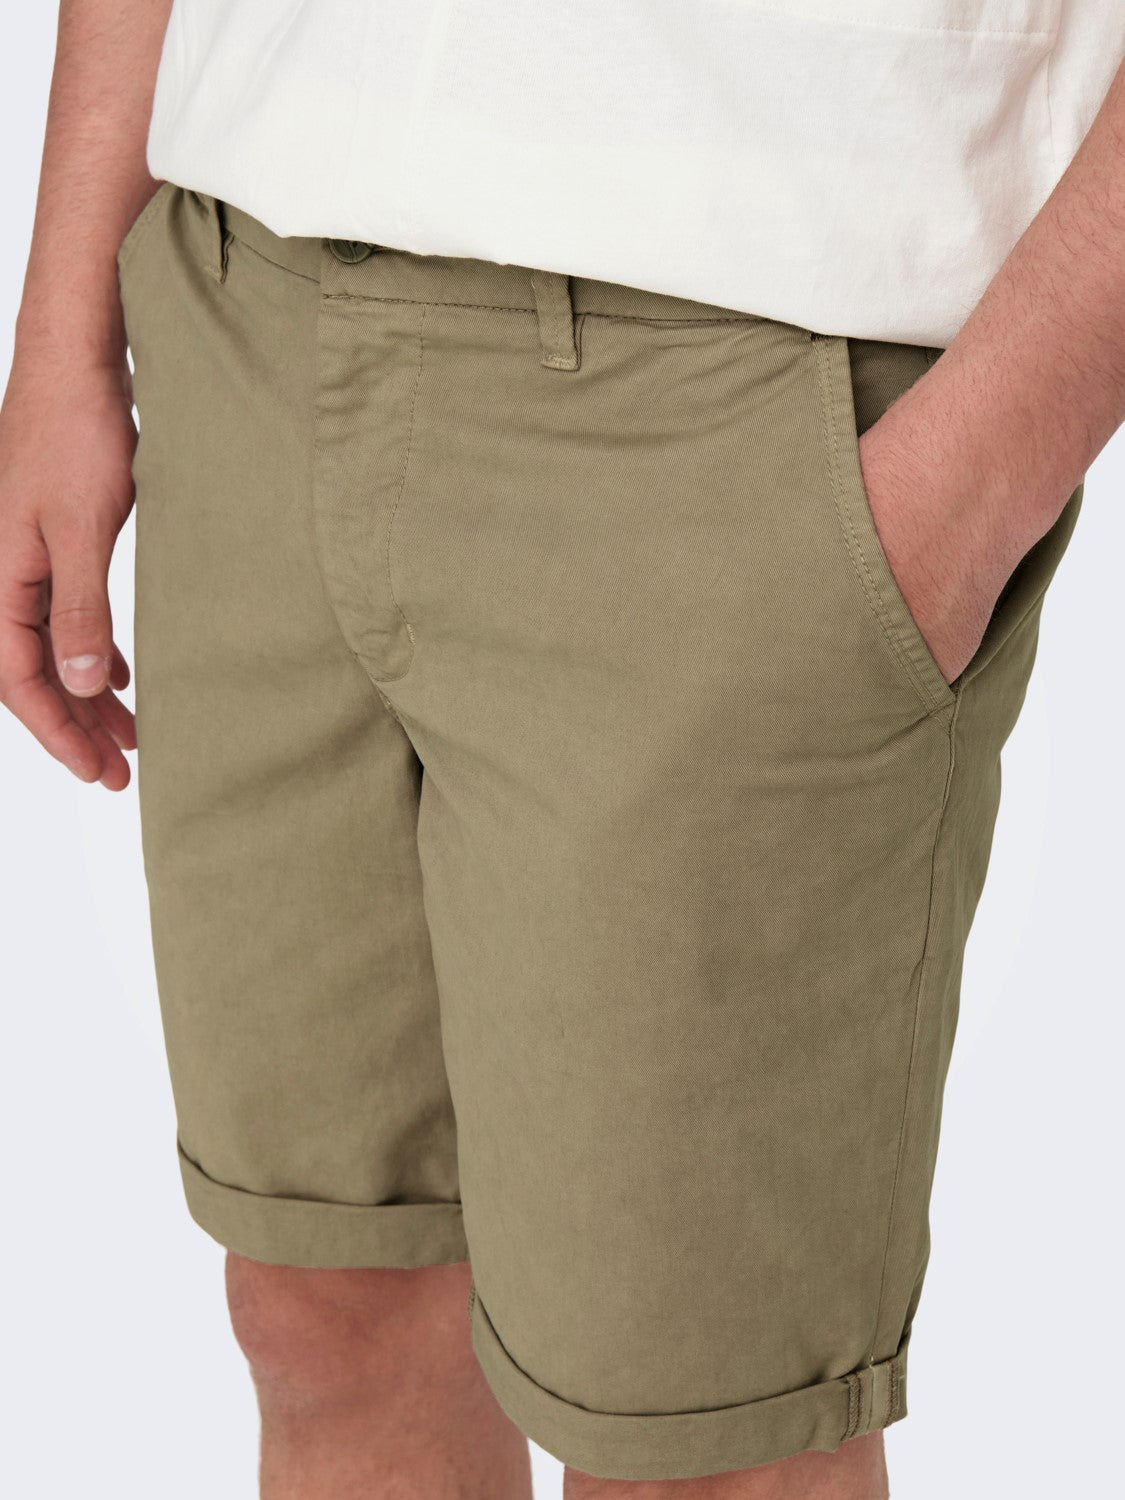 ONLY & SONS PANTALONCINI CHINO - Beige